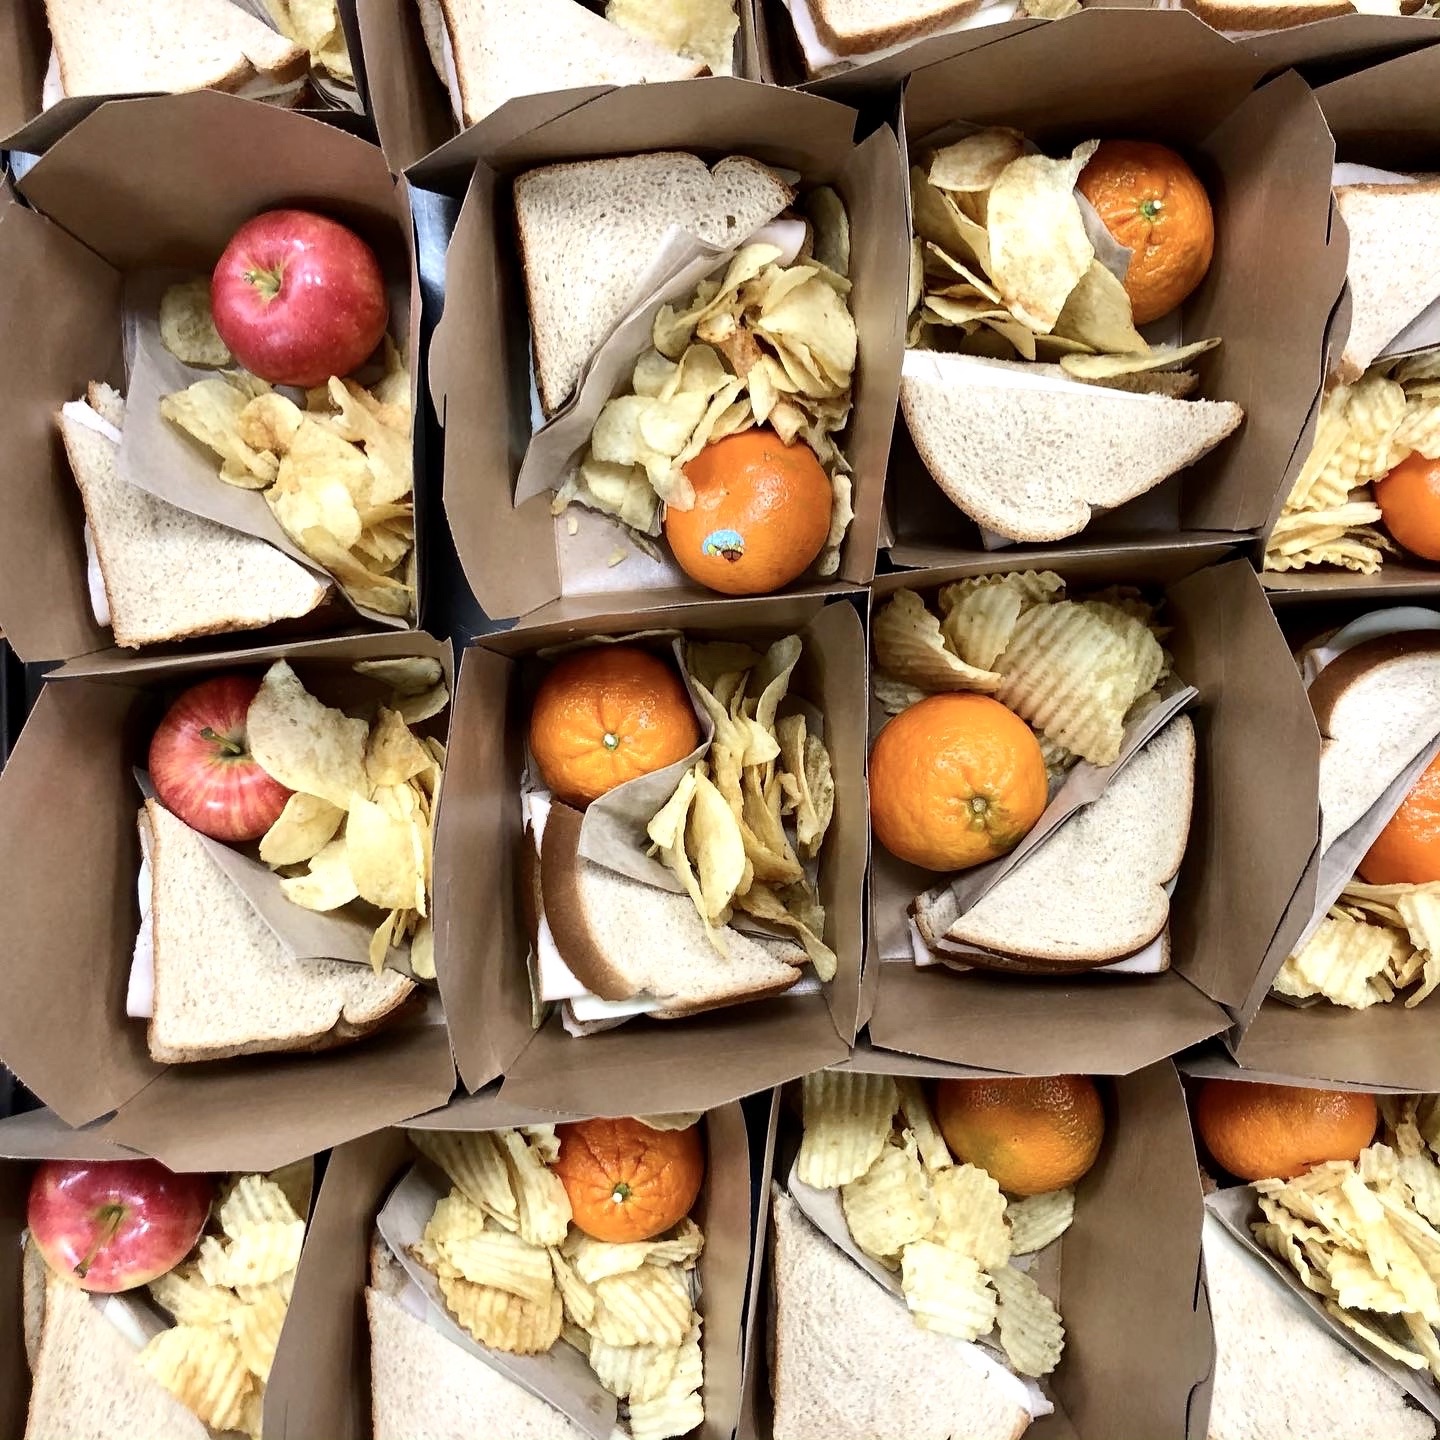 Brown takeout containers filled with crinkle cut chips, oranges, apples, and sandwiches sliced in half.